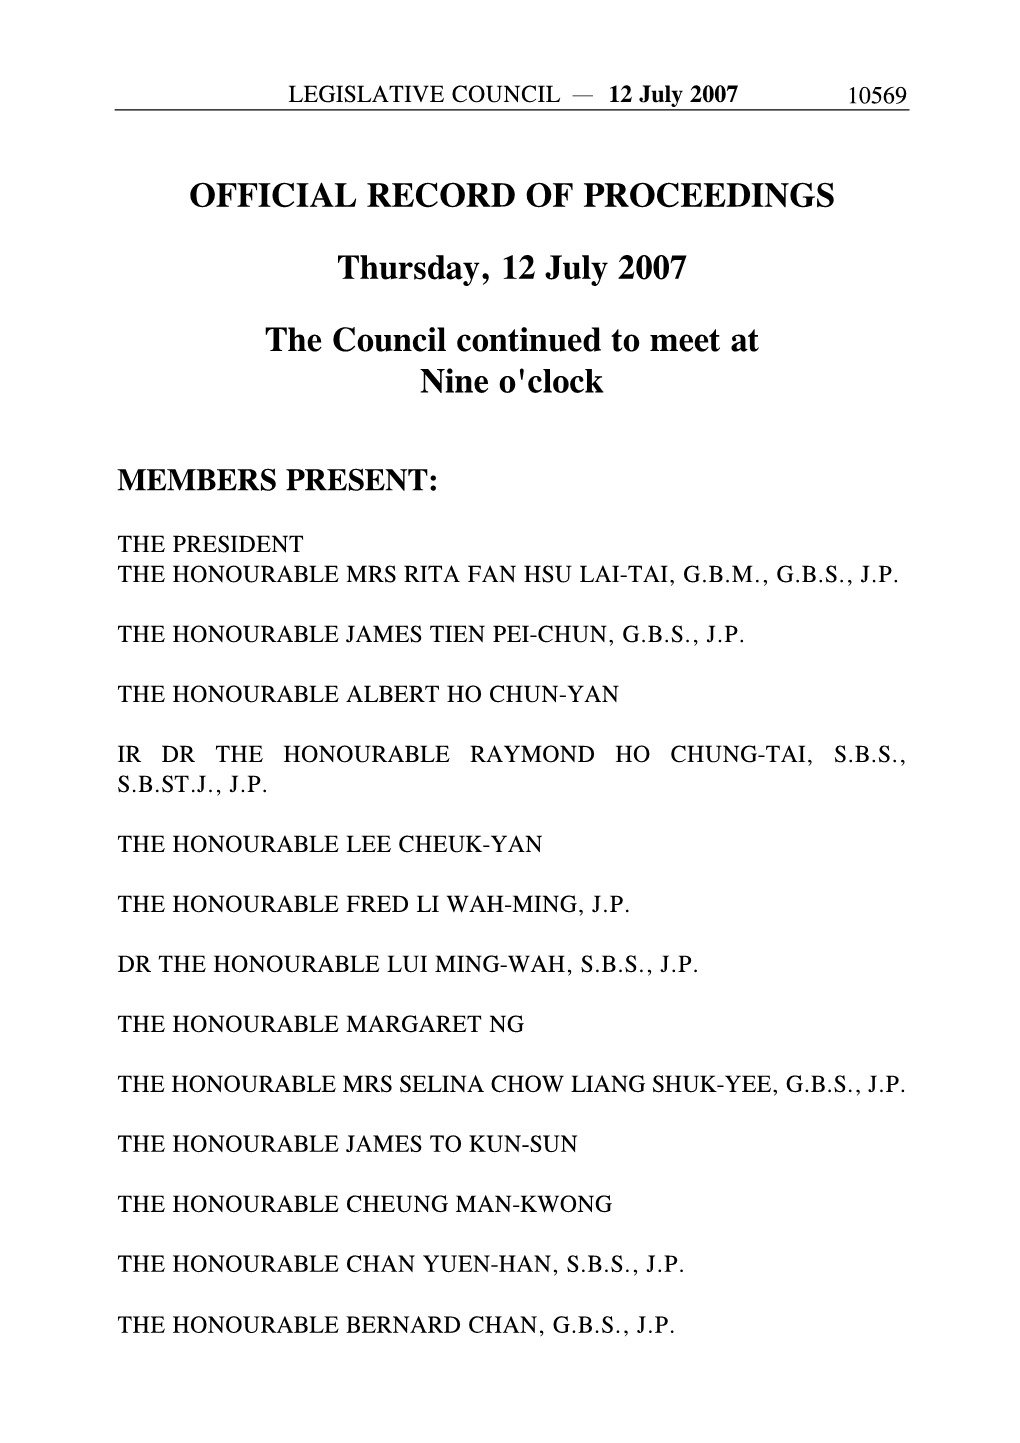 OFFICIAL RECORD of PROCEEDINGS Thursday, 12 July